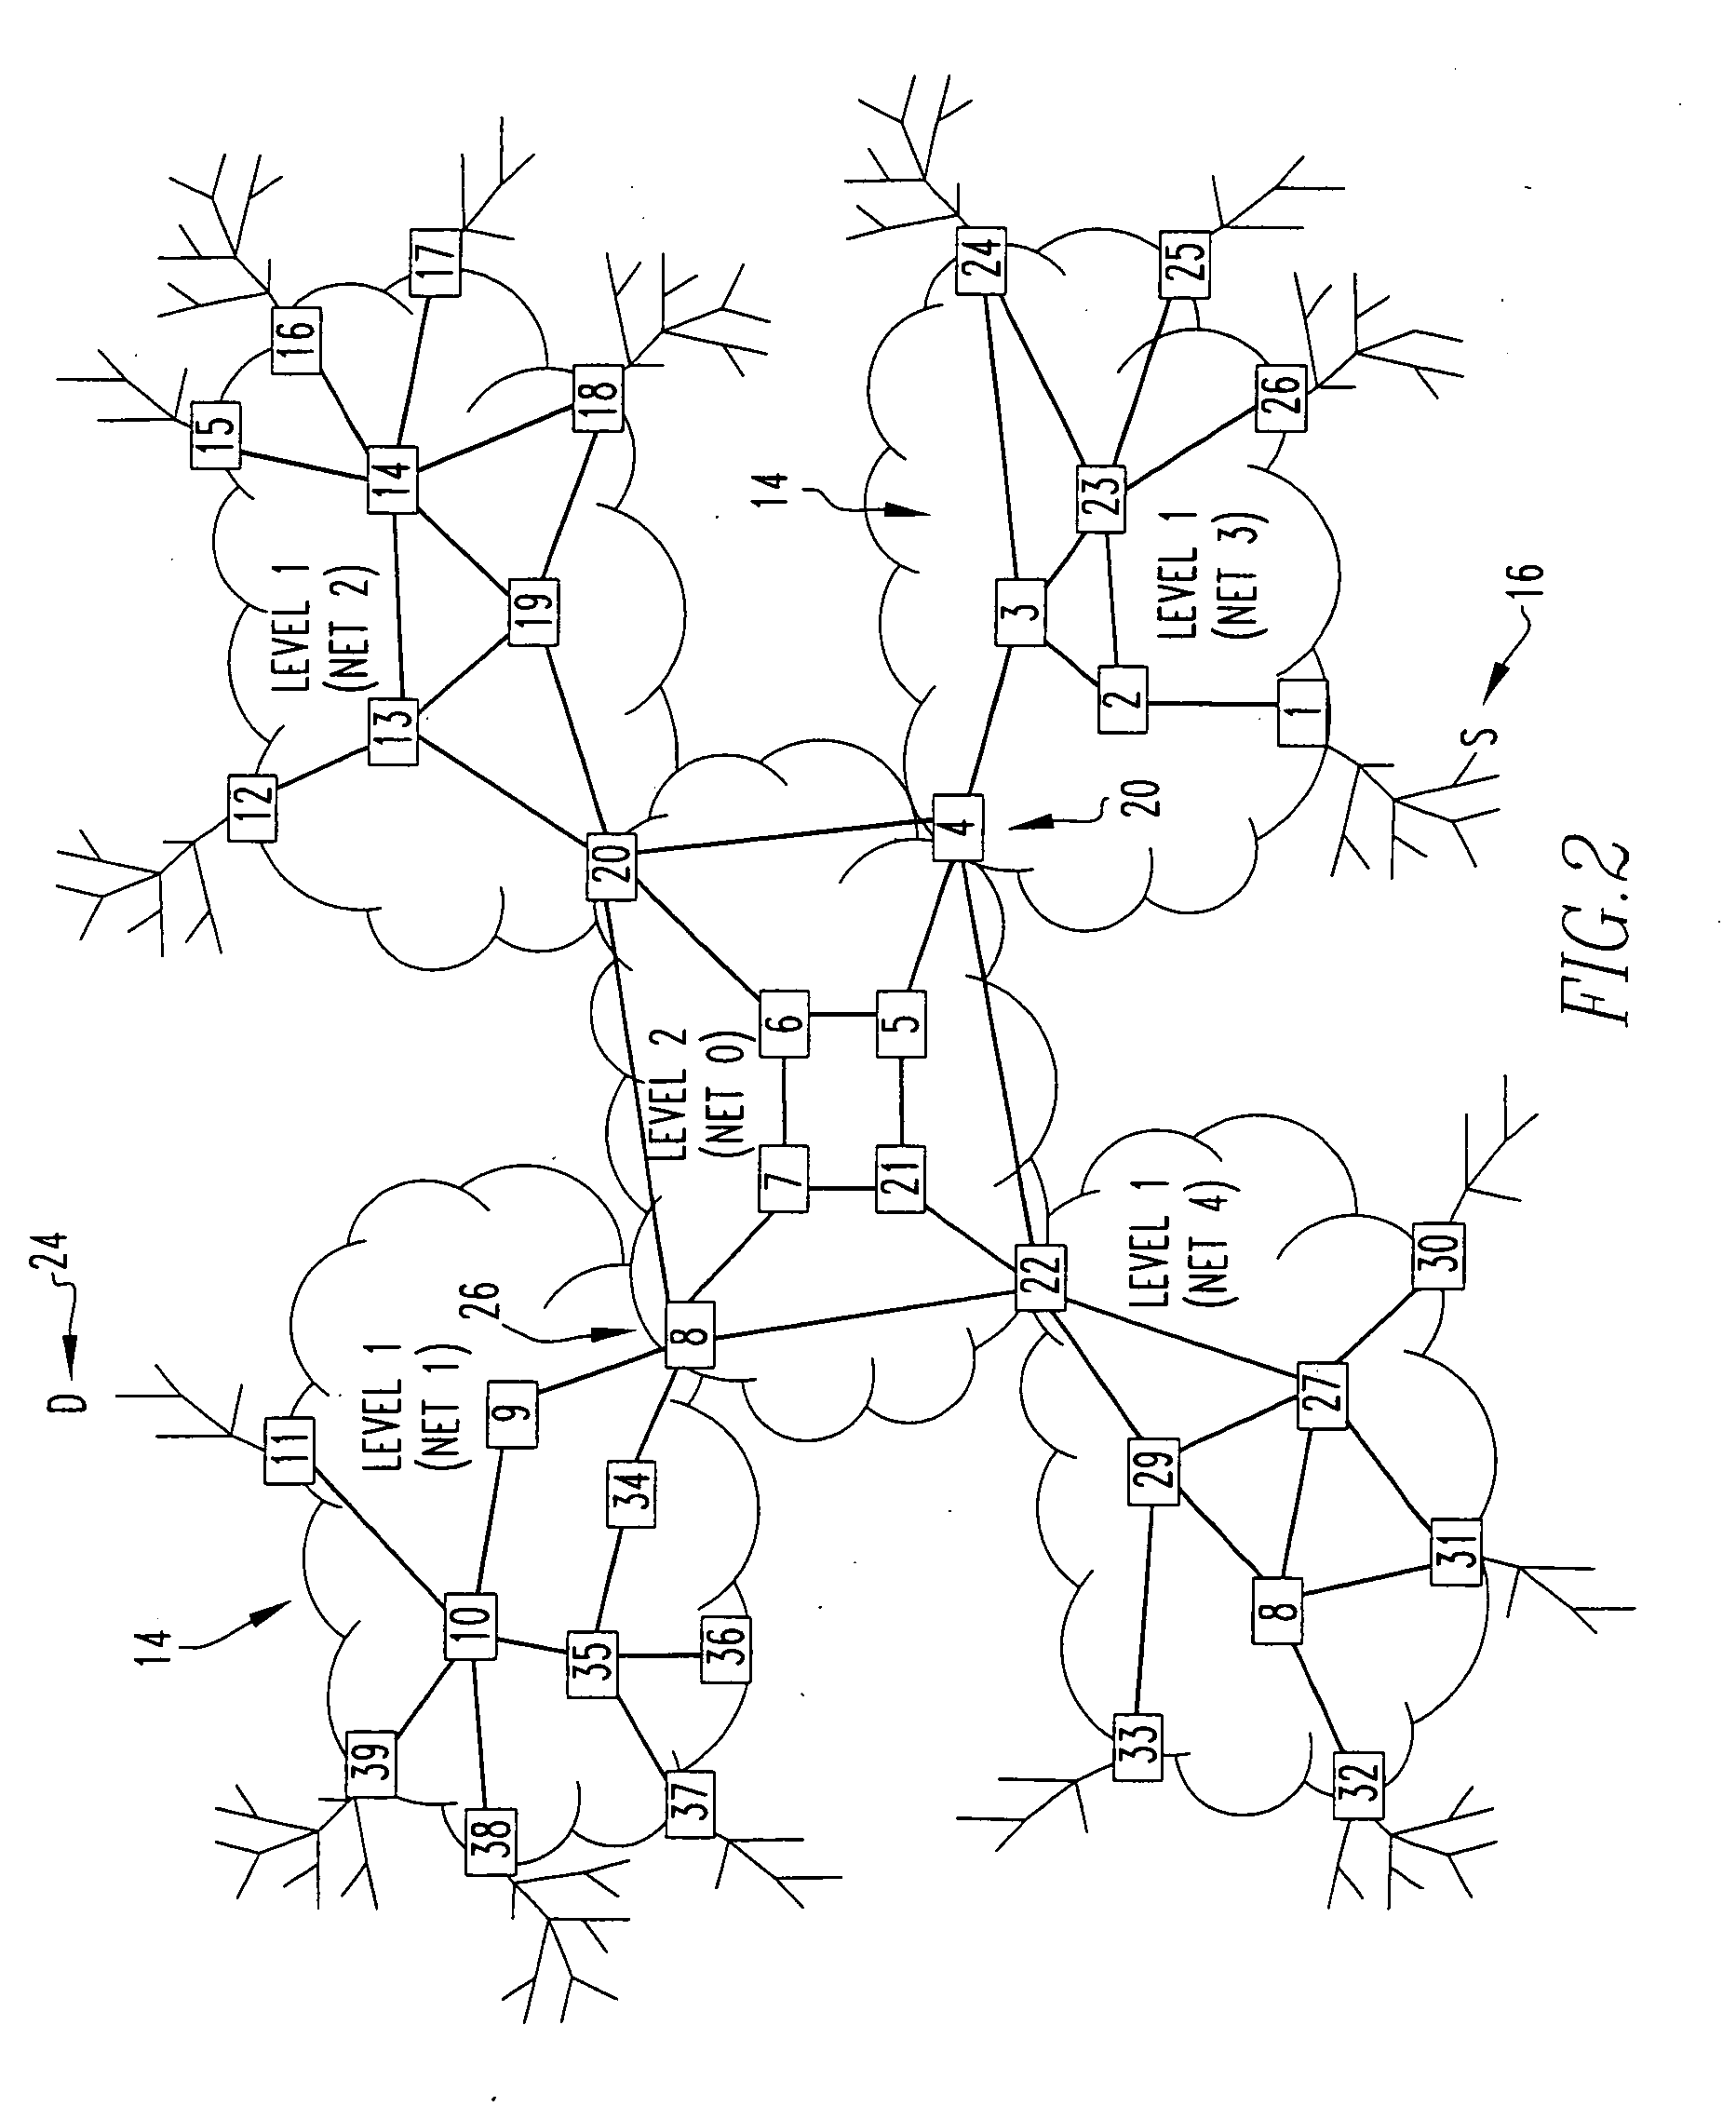 Method and system for telecommunications including self-organizing scalable ethernet using is-is hierarchy